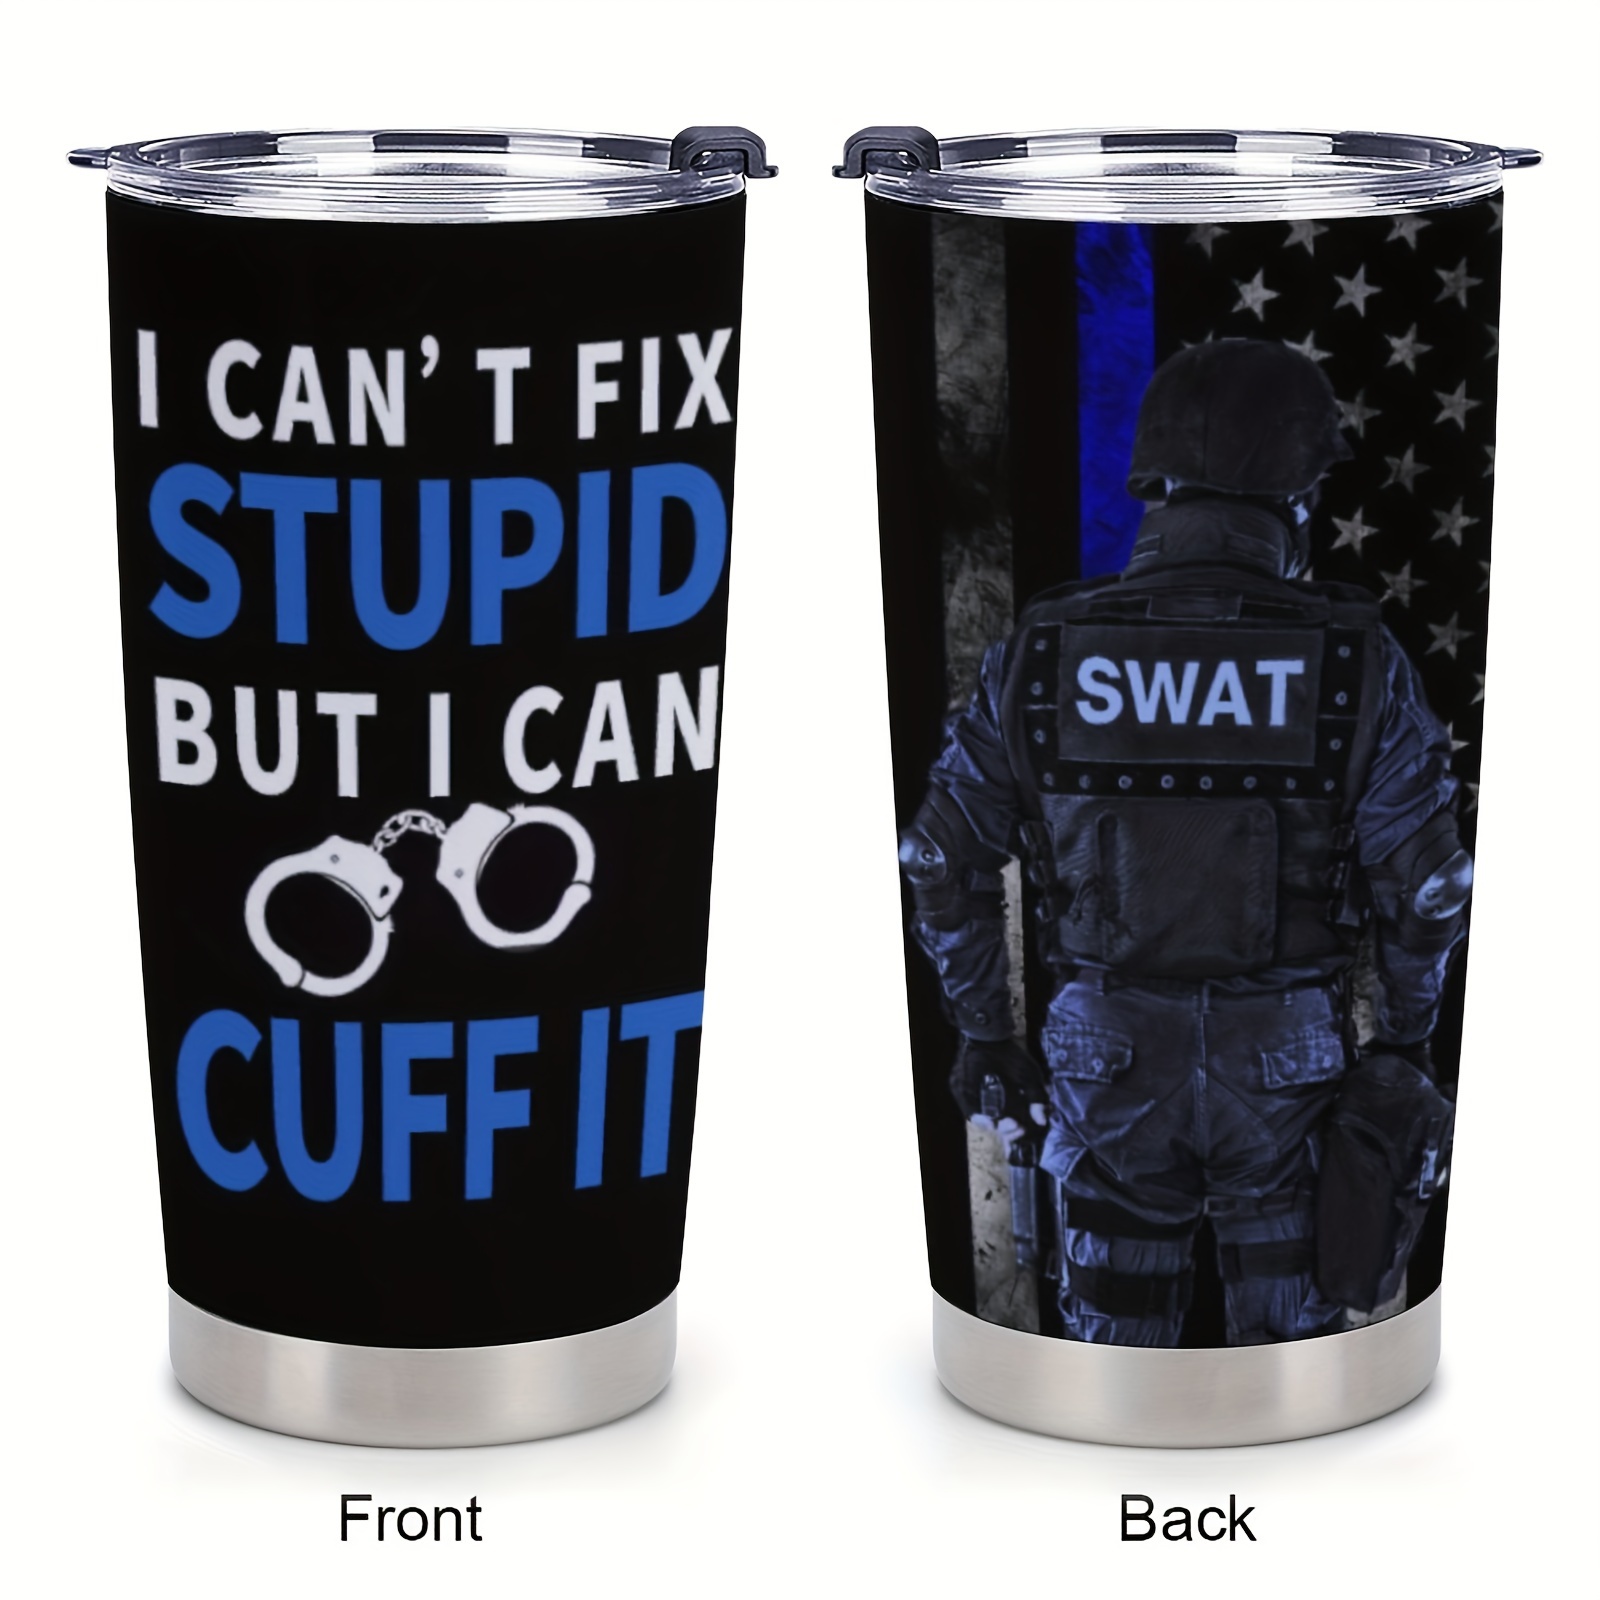 Police Officer Coffee Mug, Cop Gifts, Funny Police Gifts, I Can't Fix  Stupid, Funny Cop Gifts 